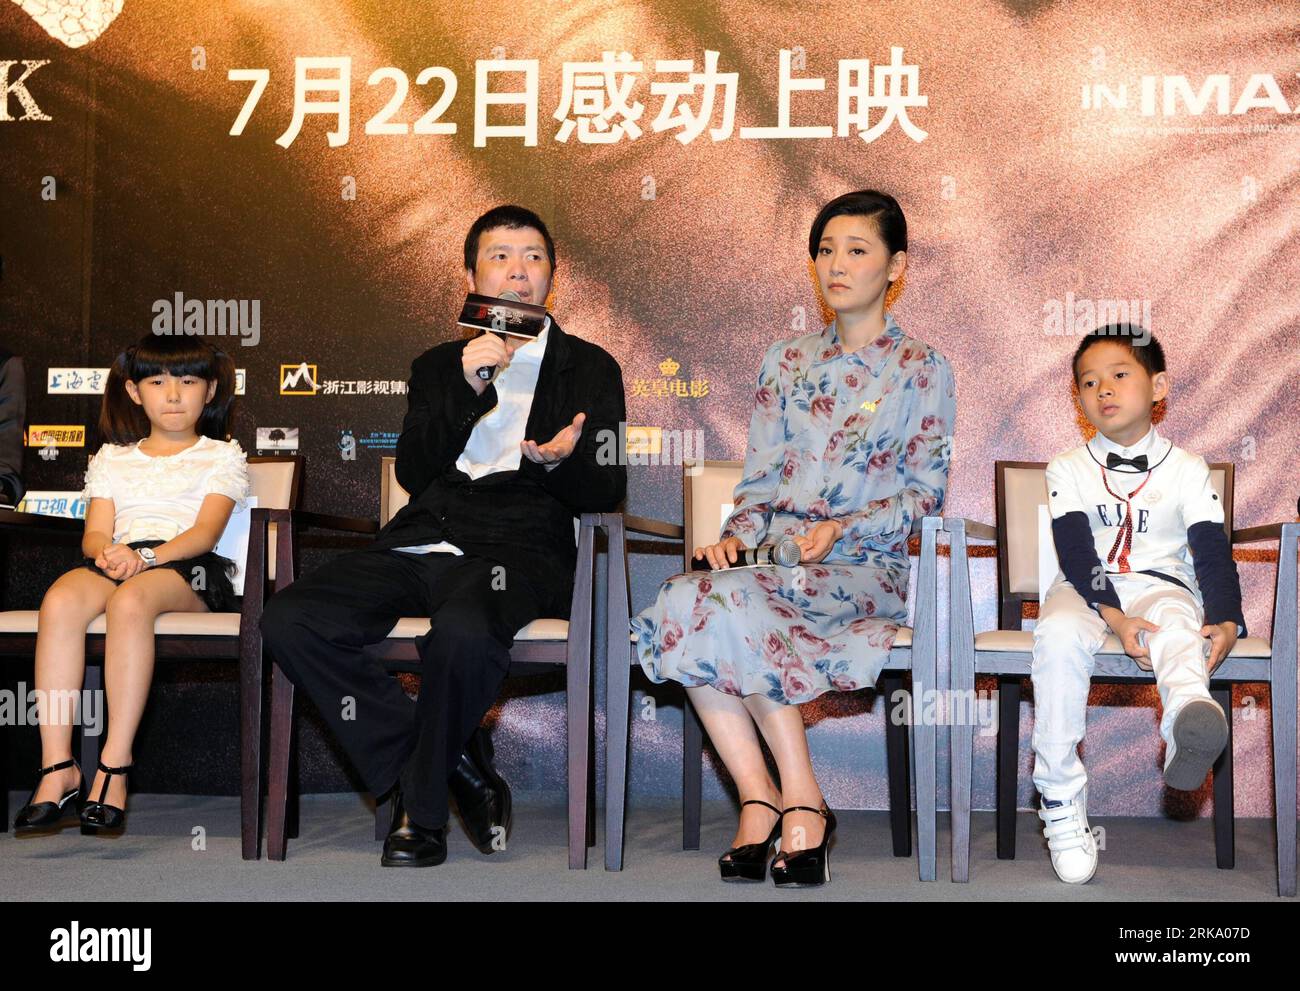 Bildnummer: 54248547  Datum: 13.07.2010  Copyright: imago/Xinhua (100723) -- SUZHOU, July 23, 2010 (Xinhua) -- Director Feng Xiaogang (2nd L) answers question of journalists during a premiere news conference in Beijing, capital of China, July 13, 2010. In 1976, a 7.8-magnitude quake hit Tangshan City of north China s Hebei Province, and left more than 240,000 dead. The movie Aftershock which is directed by Feng Xiaogang, reflects the devastating earthquake in Tangshan in 1976. The film, with the tagline 23 seconds, 32 years, tells the story of a mother who had to make a choice between saving h Stock Photo